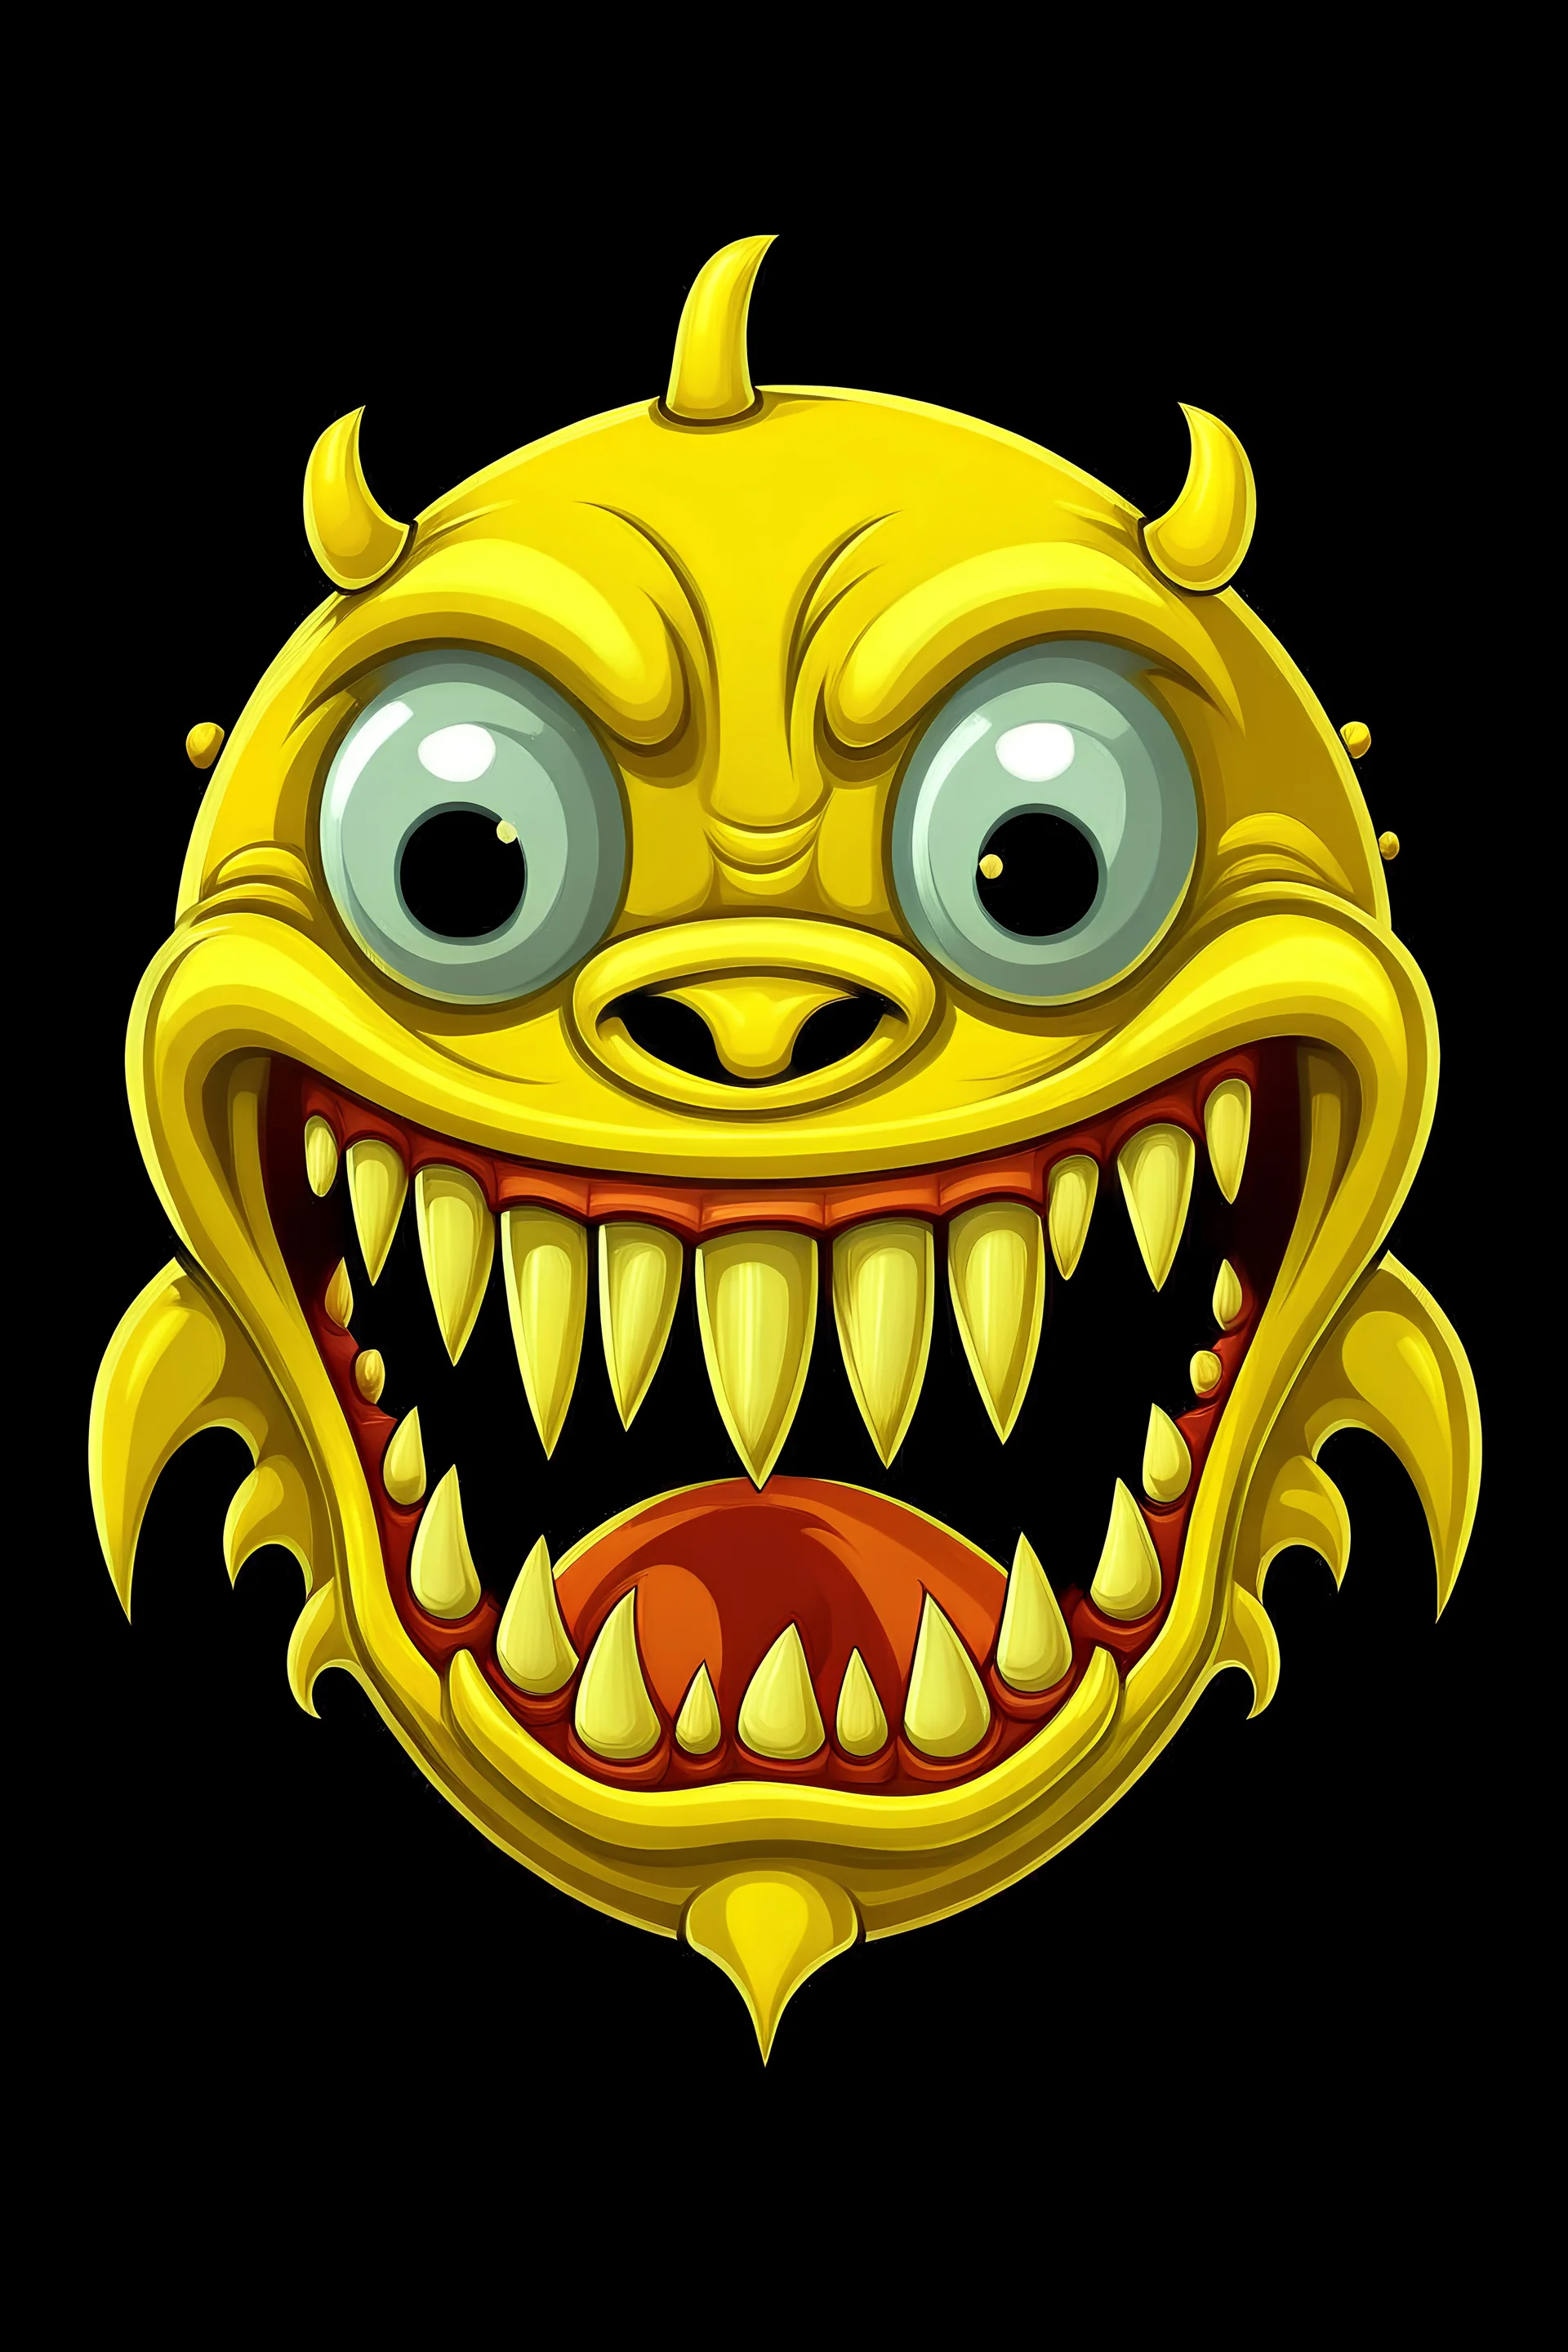 Winking covid virus with closed-mouth evil grin